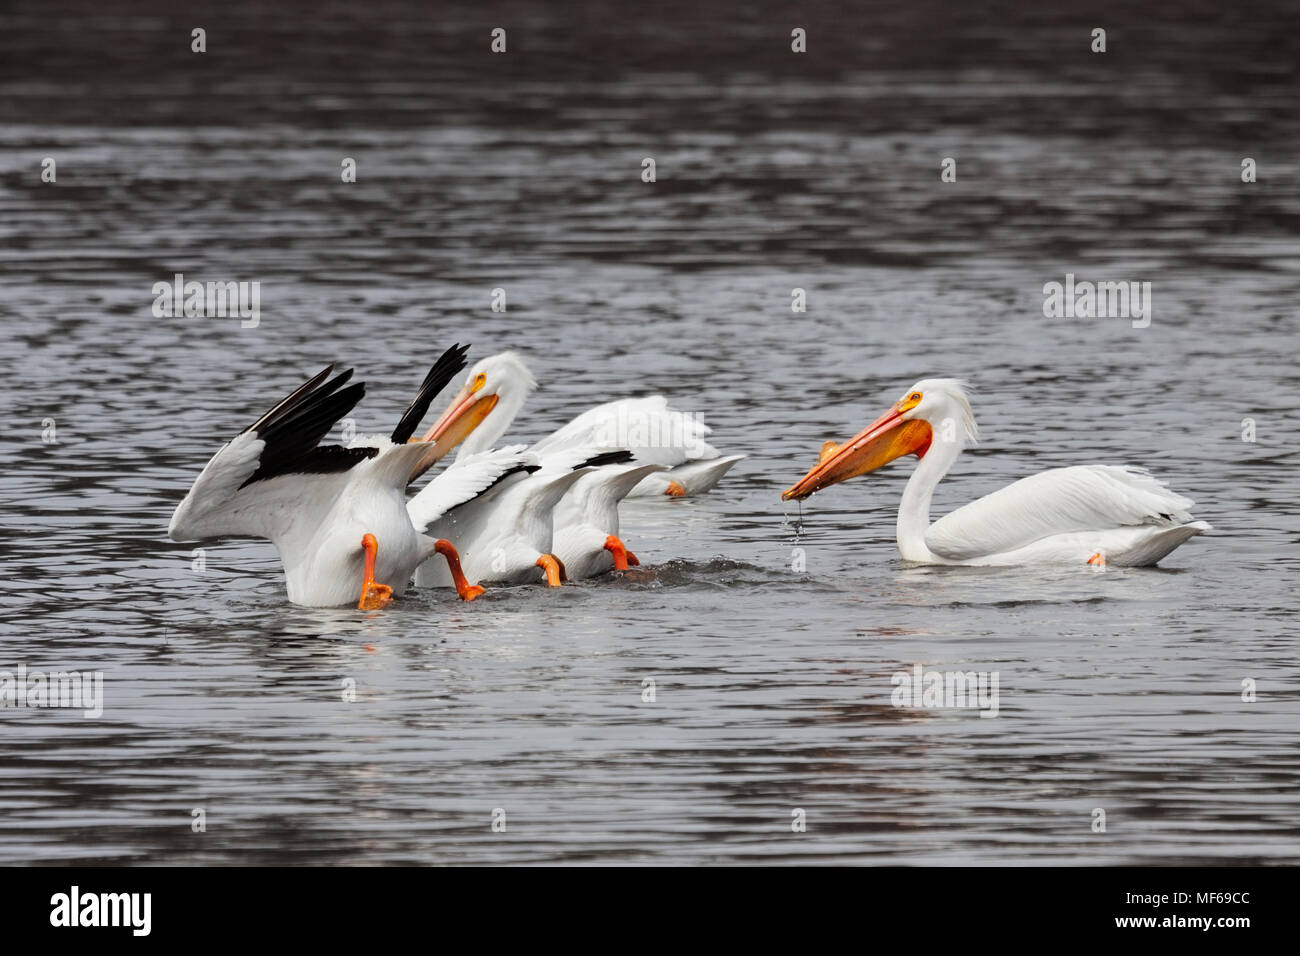 Three pelicans feed underwater with their rear ends up in the air. They are aloof to another though he provides sentinel duty from behind. Stock Photo